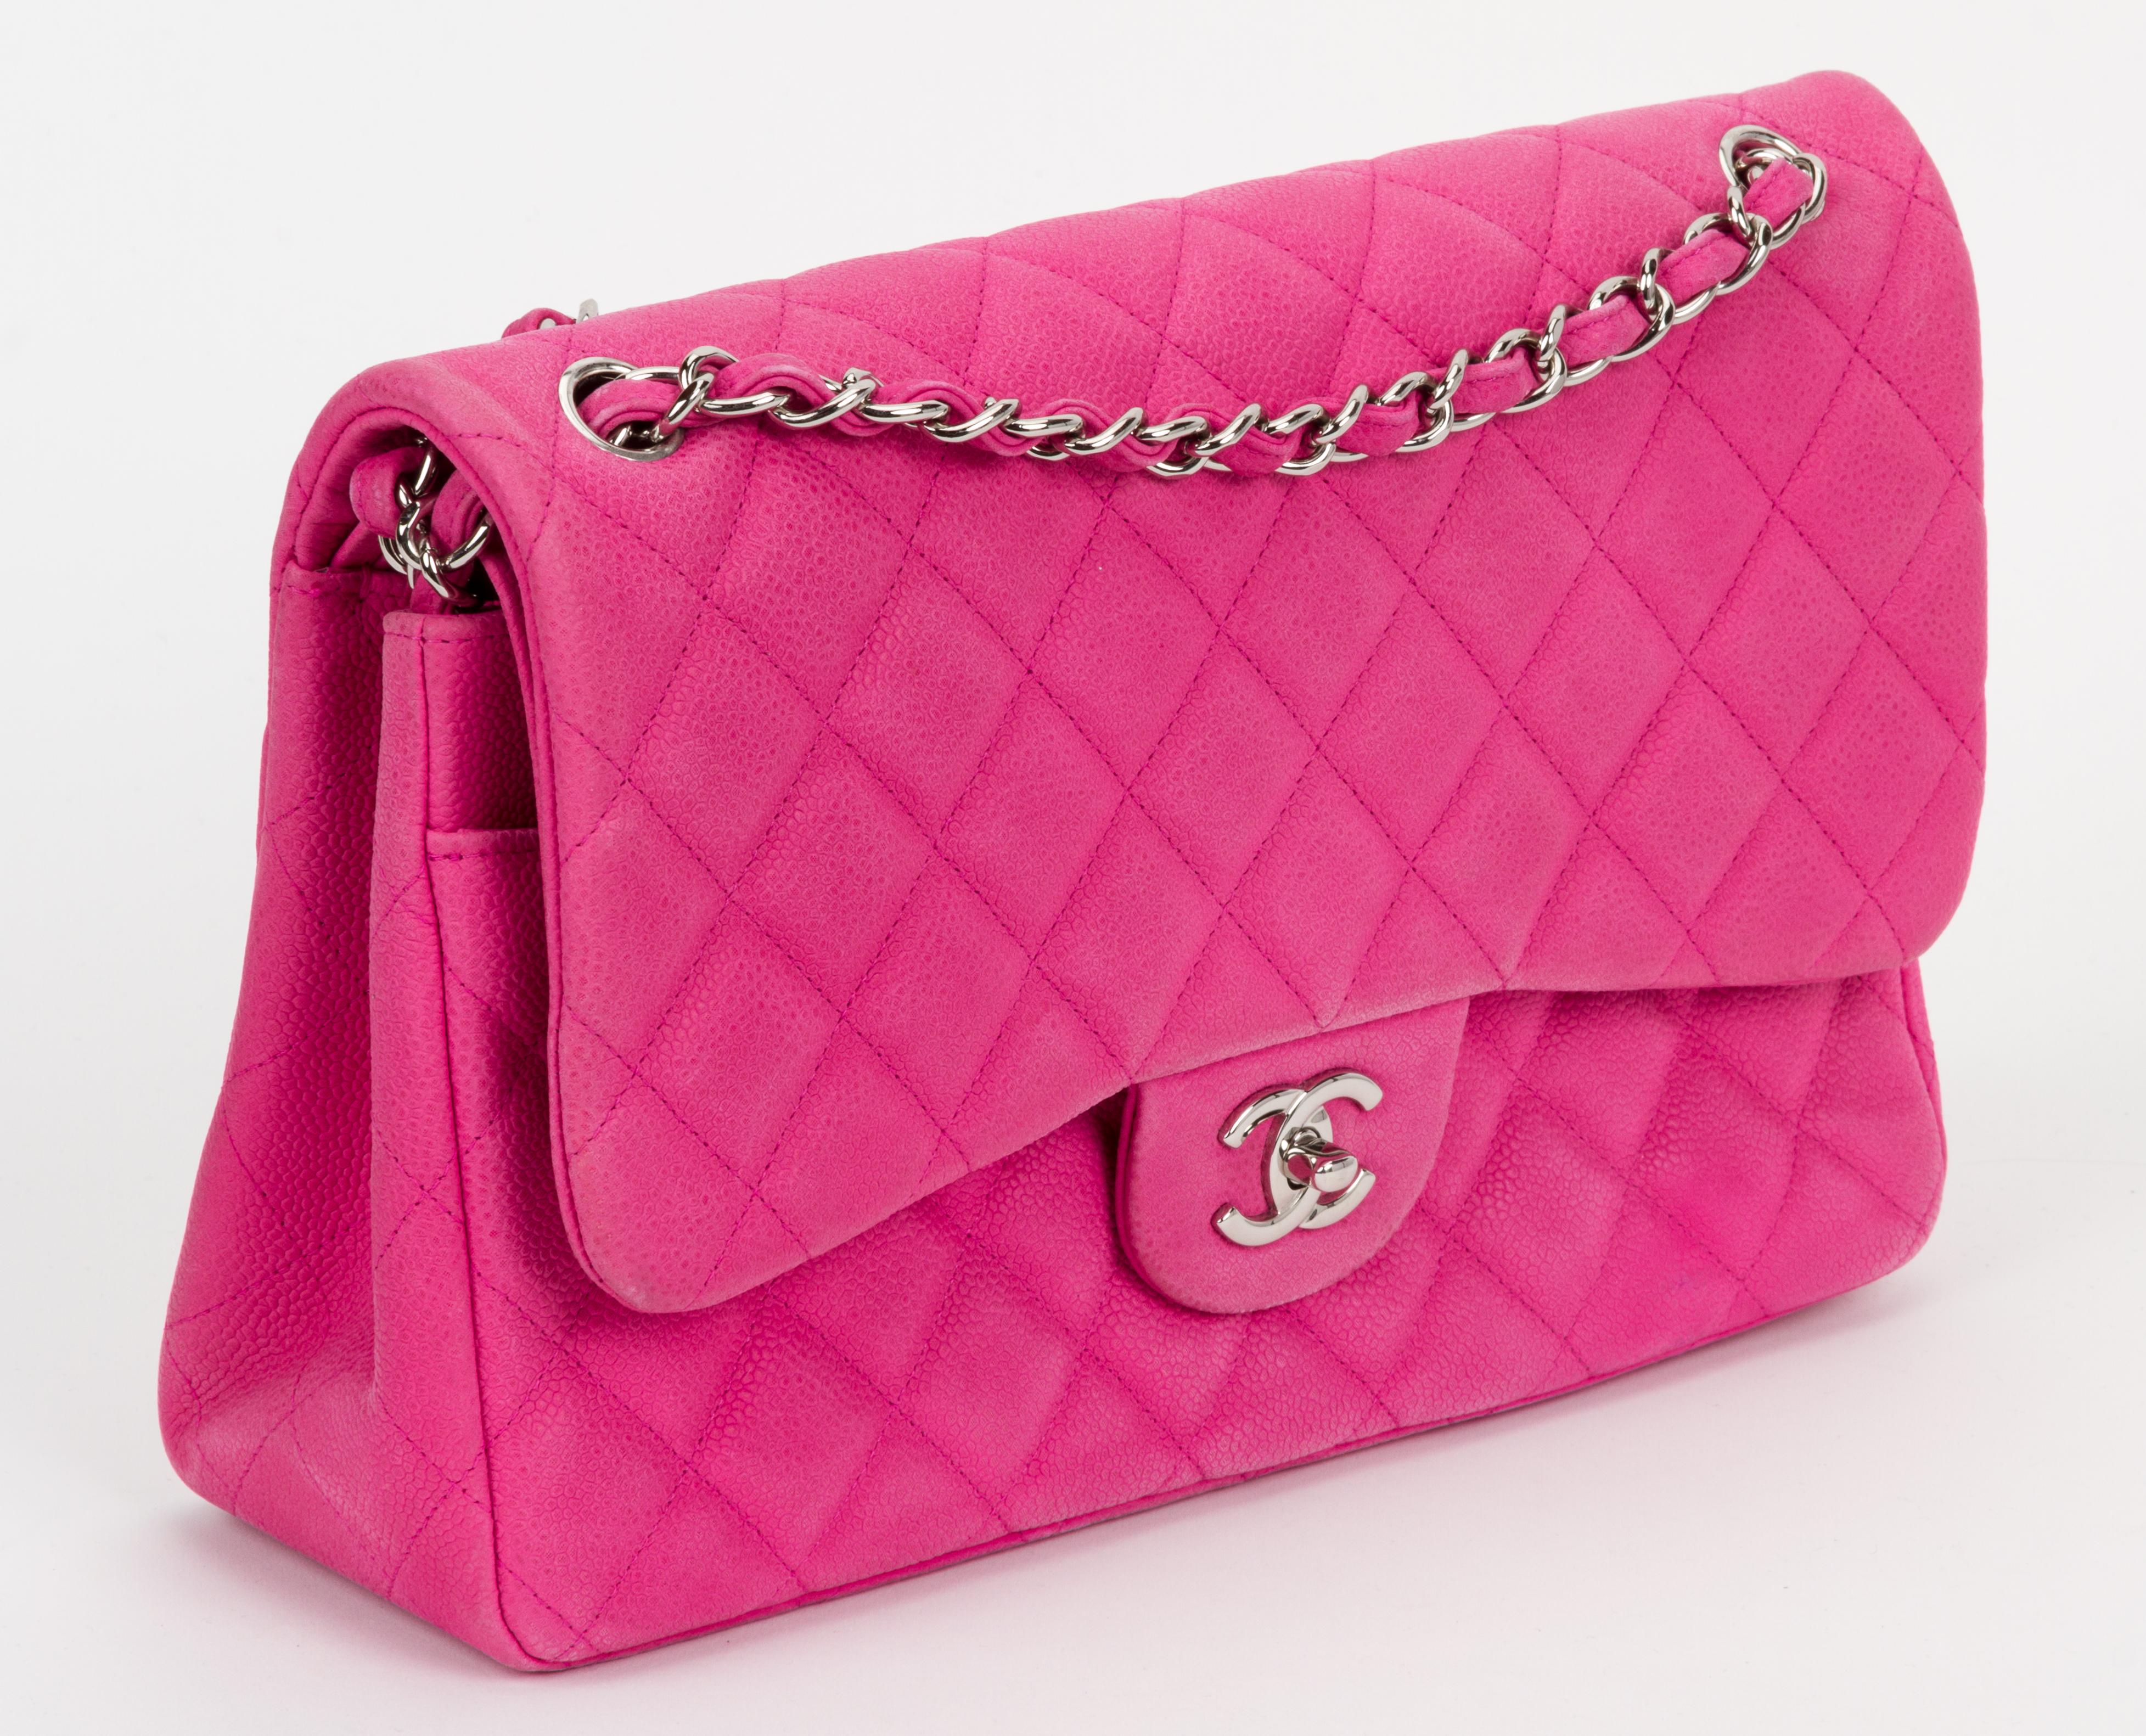 Chanel jumbo classic double flap. Hot pink caviar leather quilted with silver tone metal hardware. Single drop 24